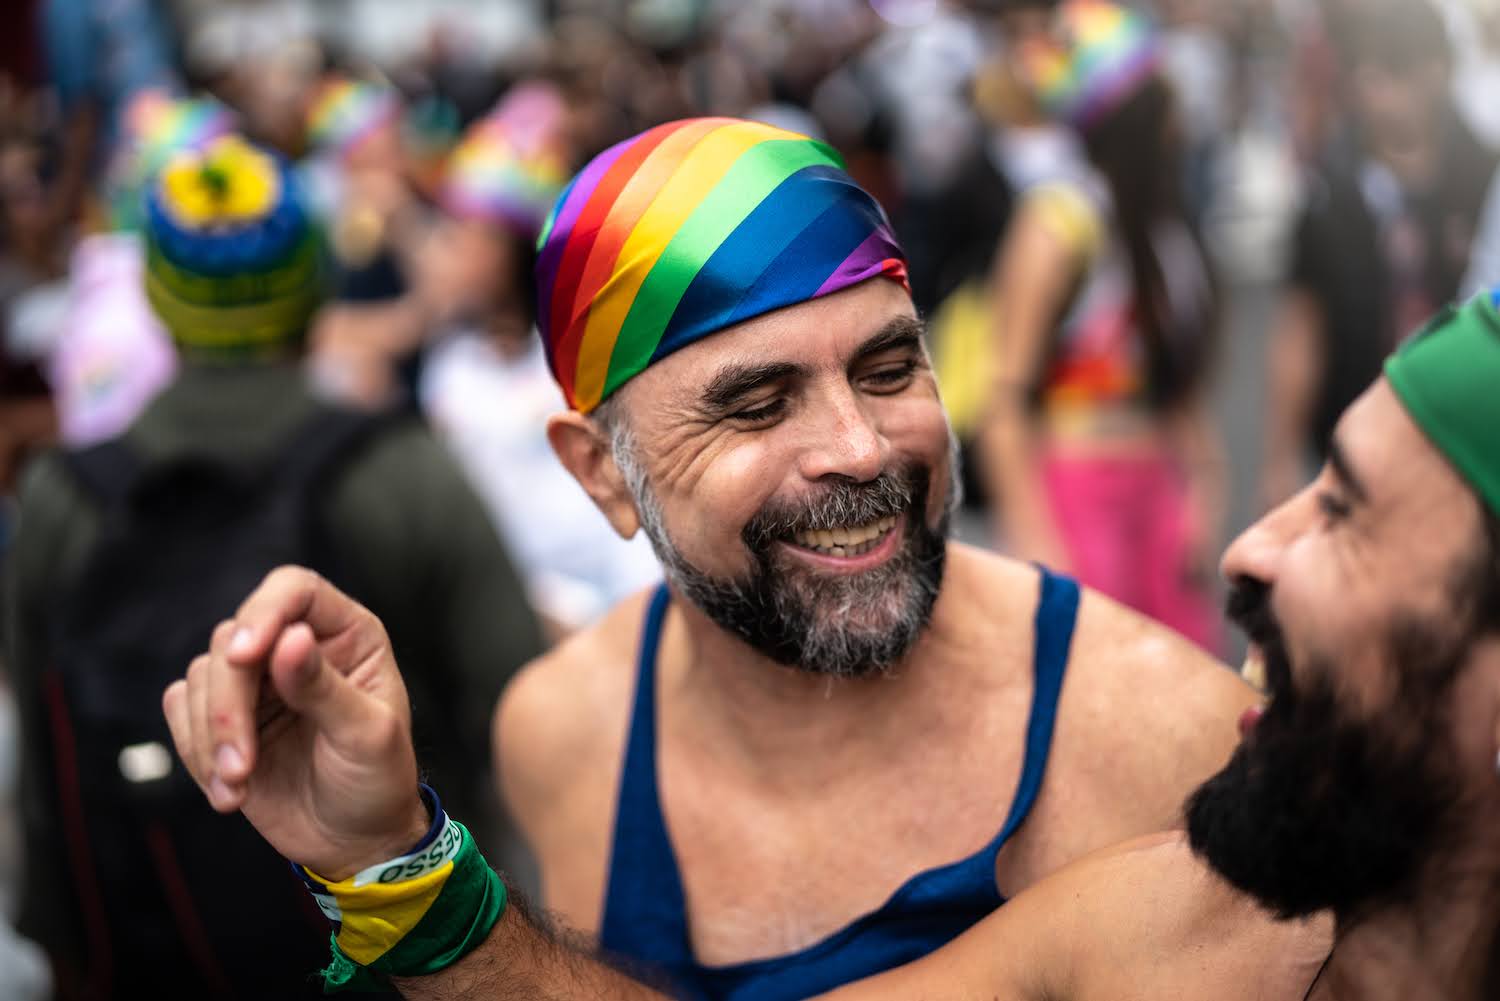 Photos of older gay men celebrating and in friendship